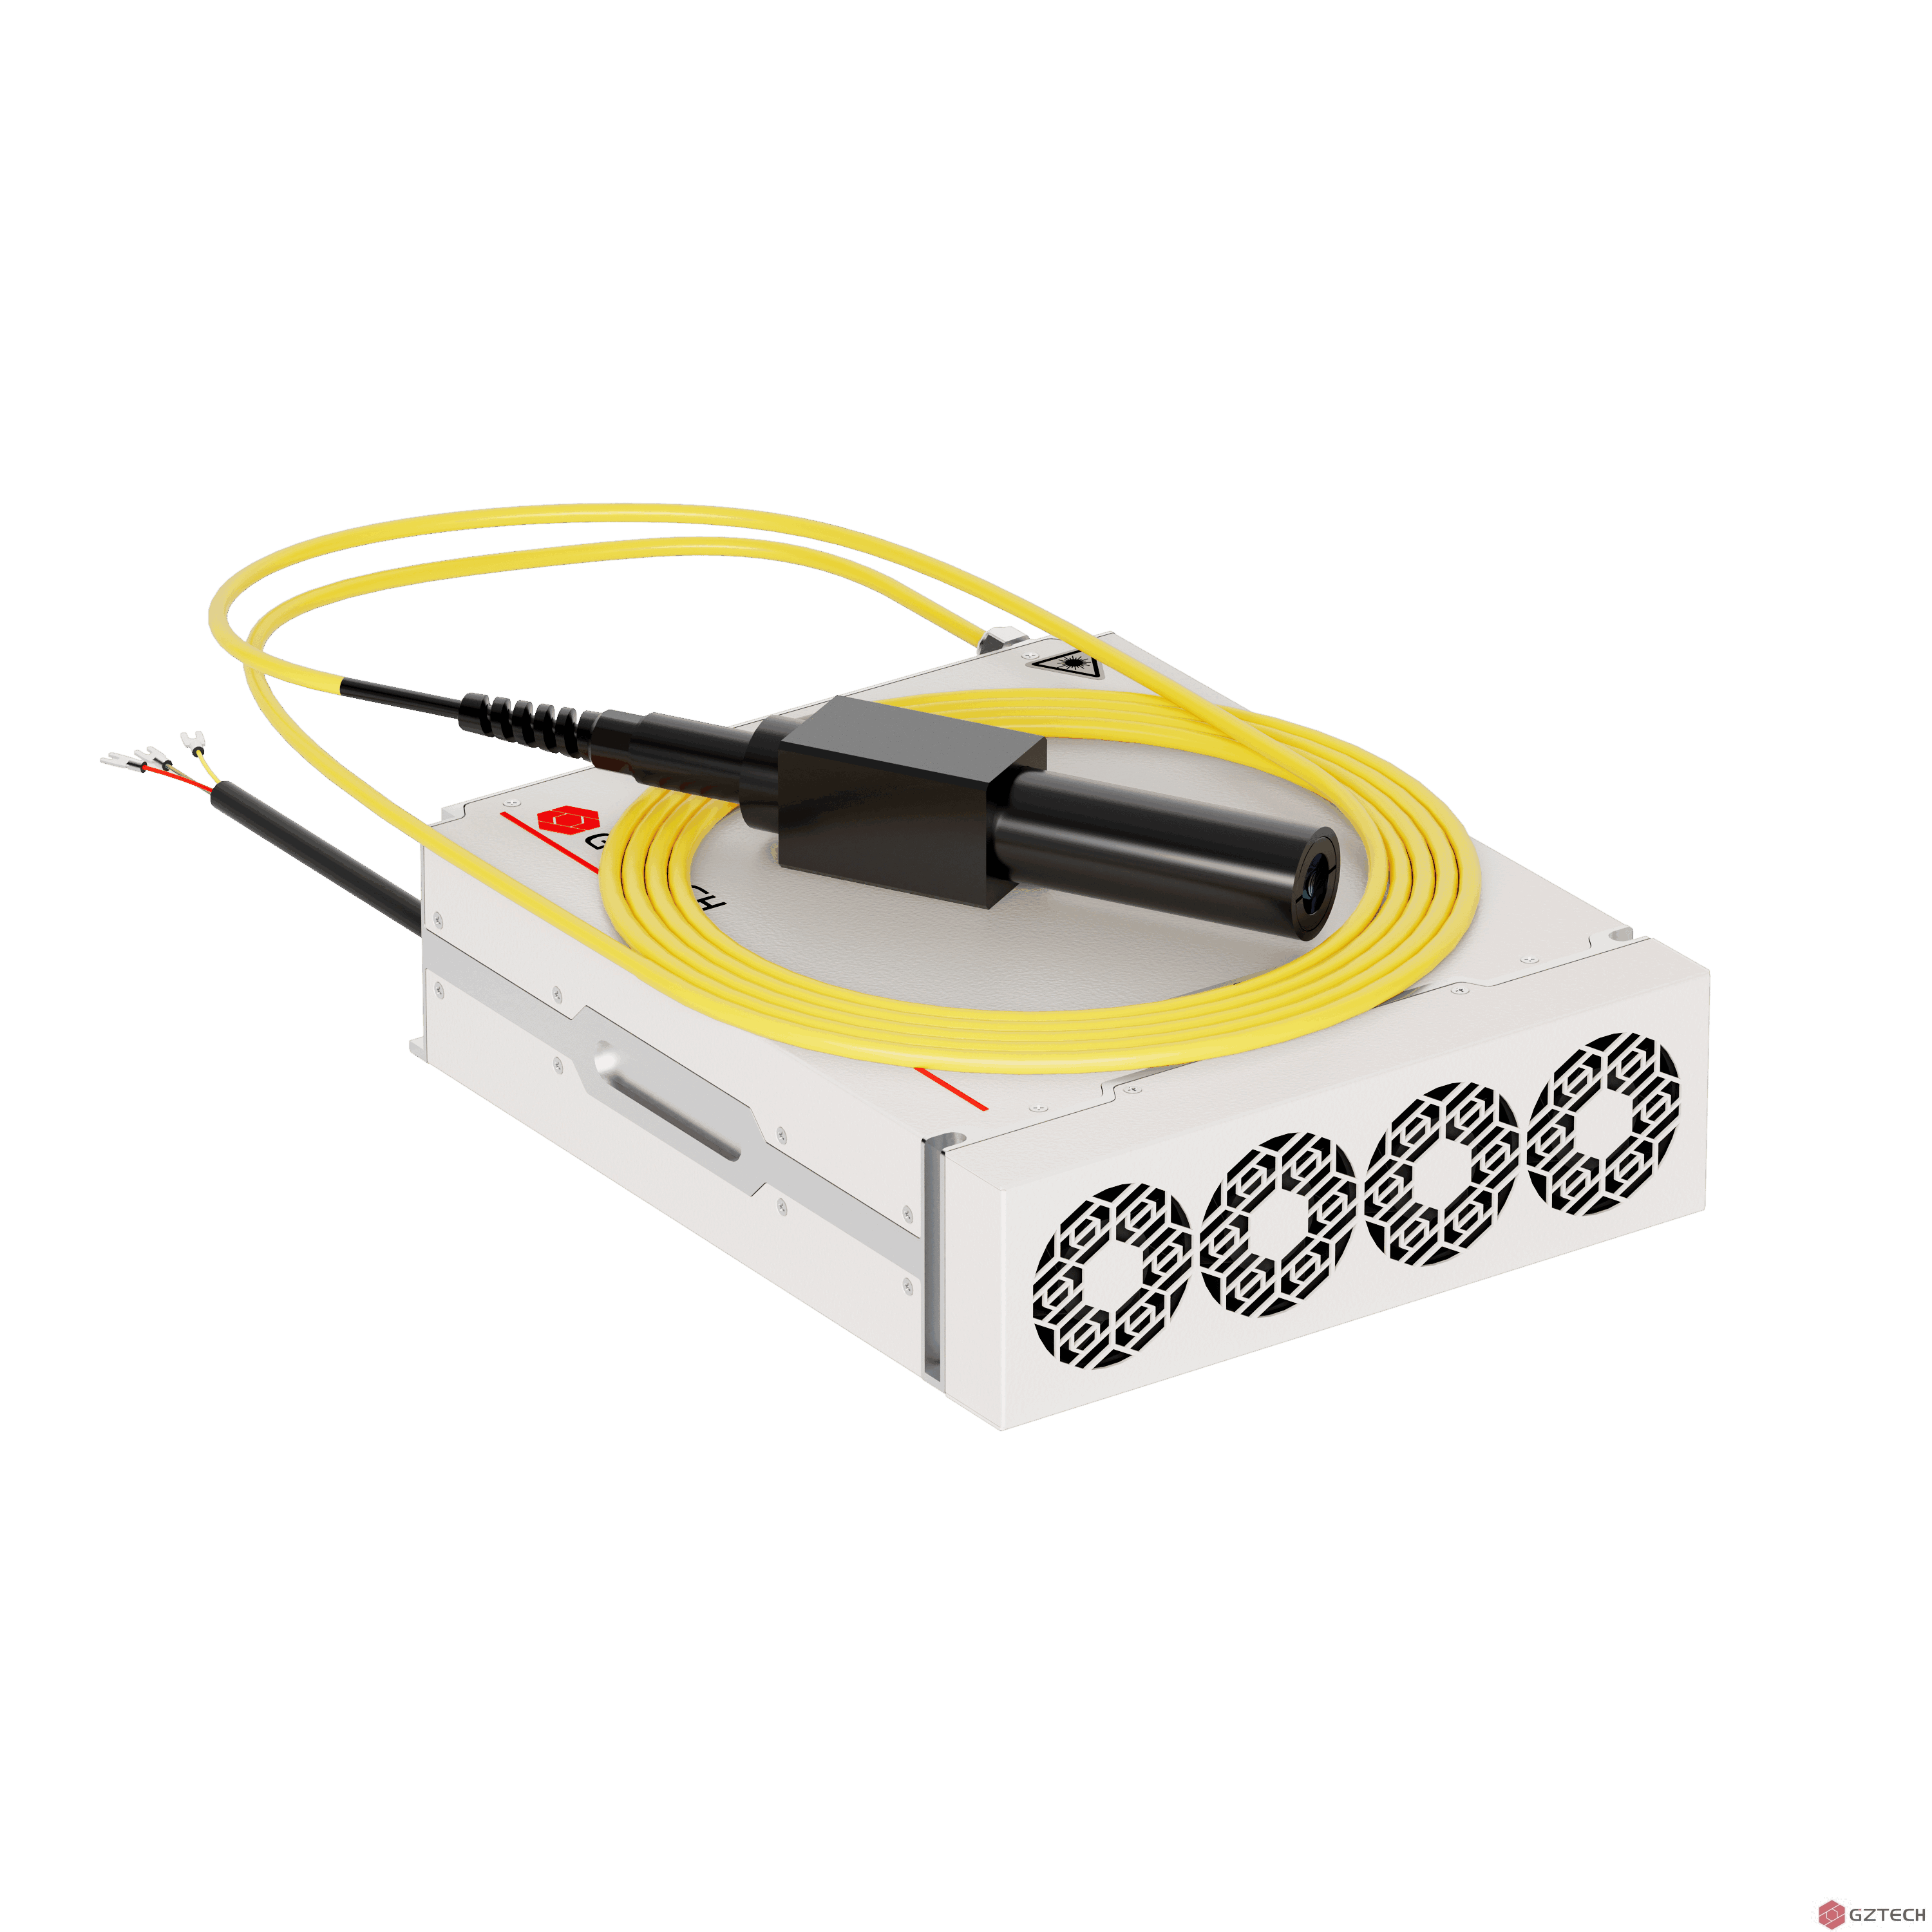 20W-200W MOPA Laser Source GME Series Cost-effective